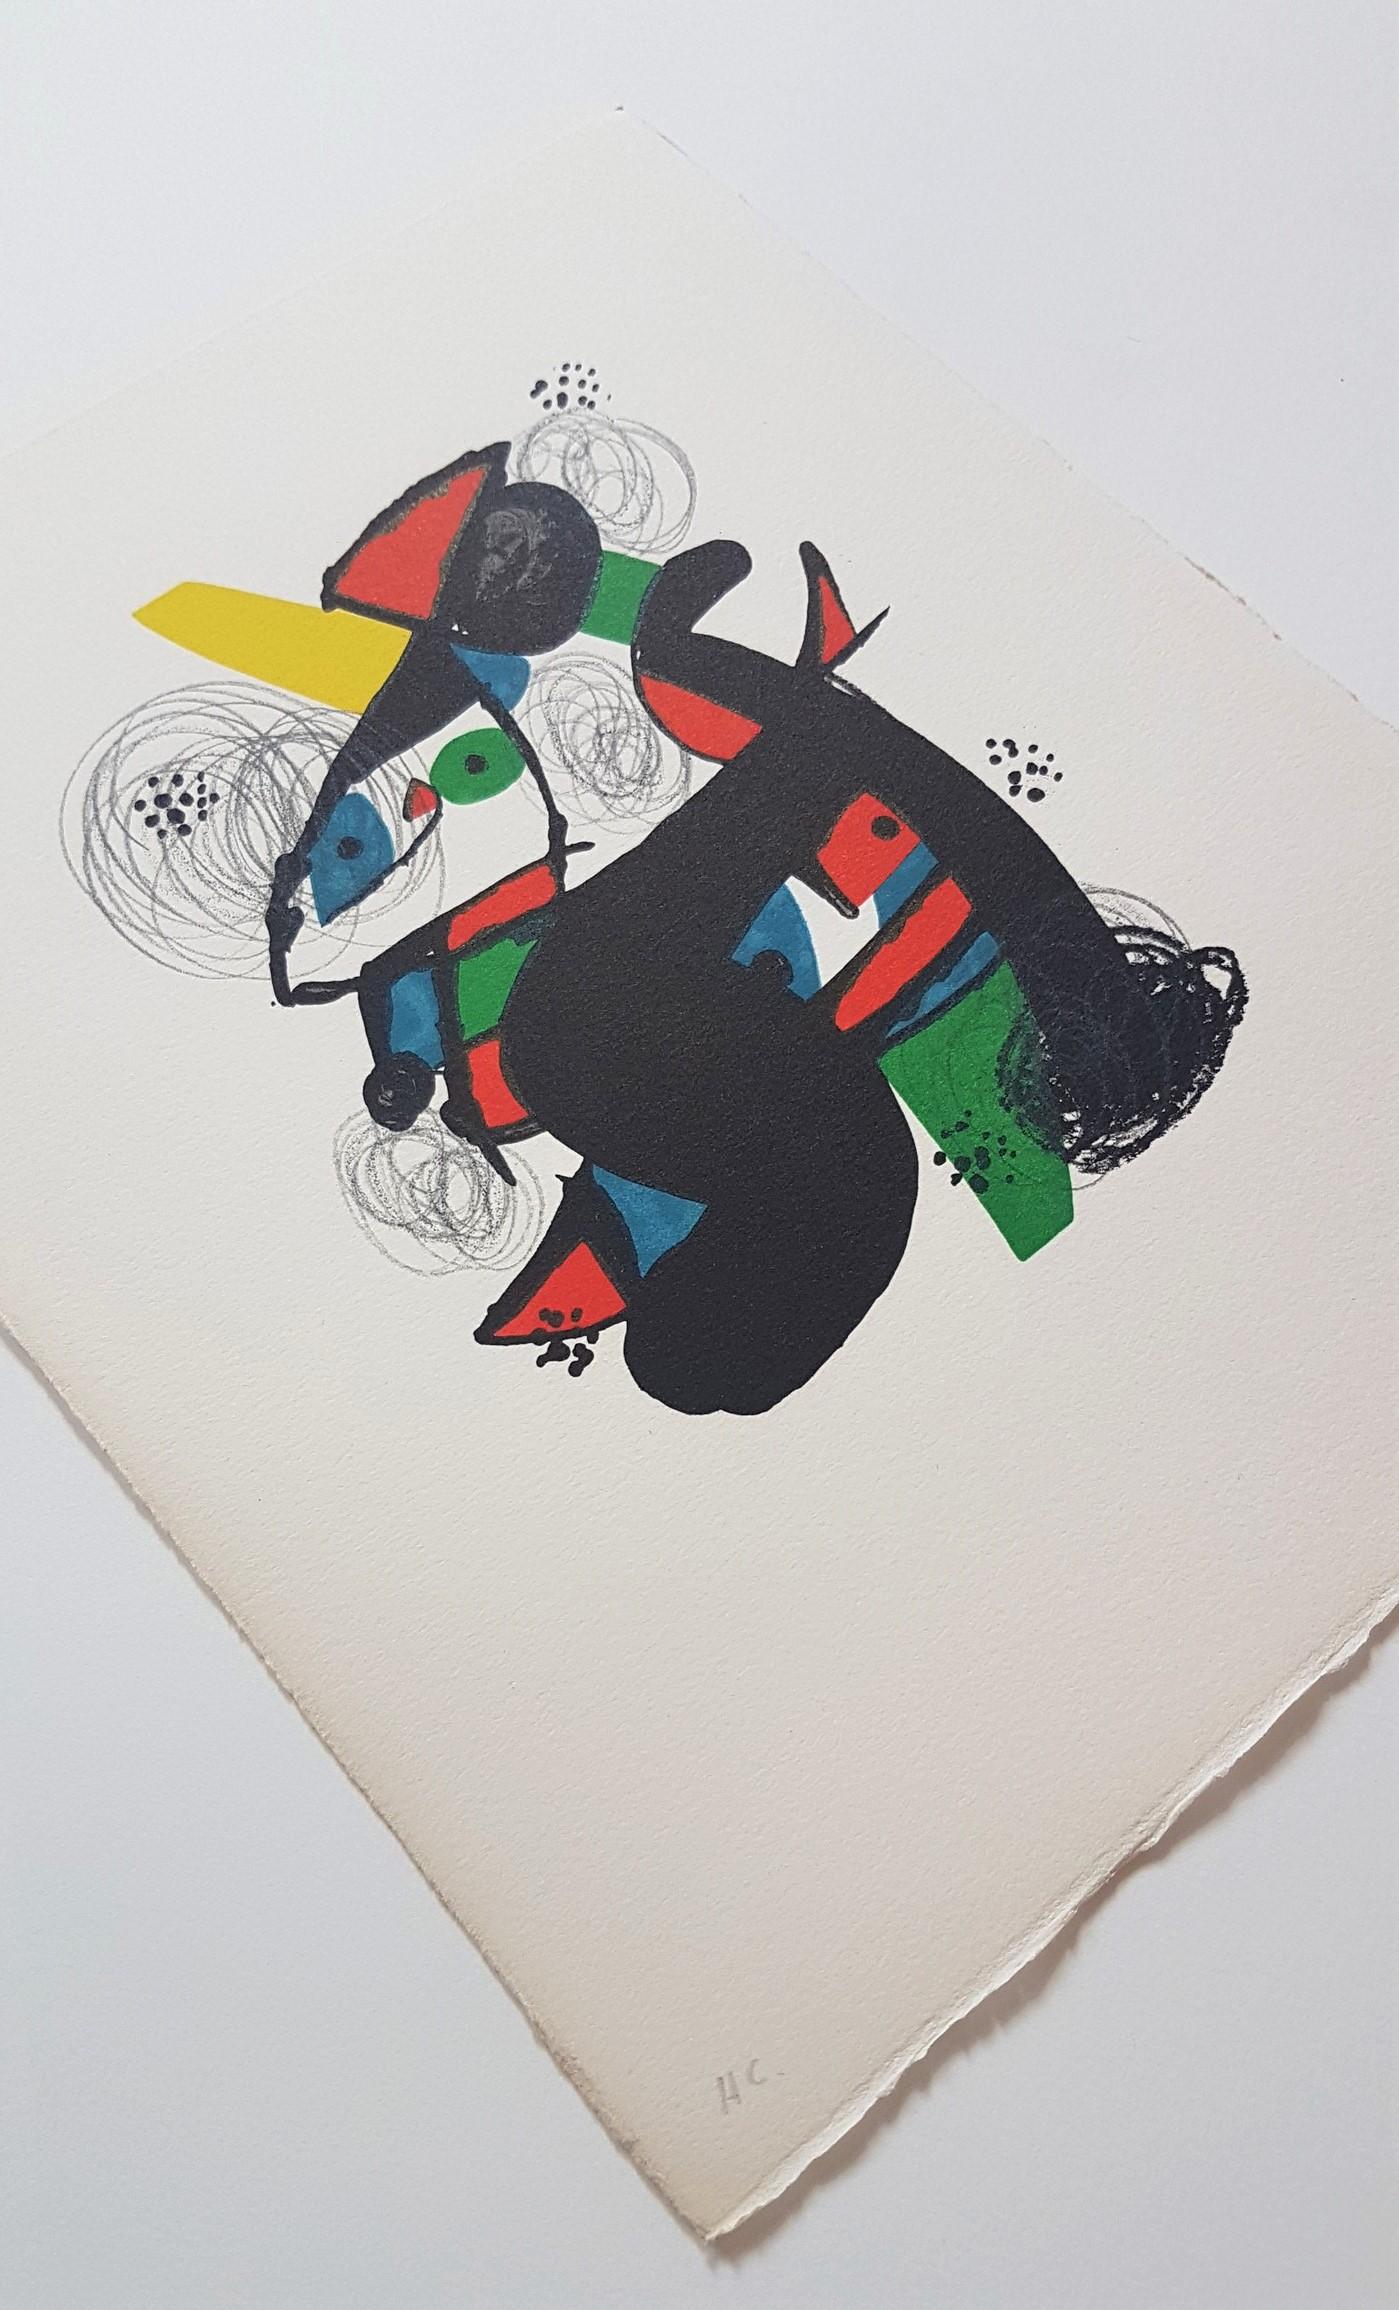 Joan Miró
La Mélodie Acide - 11
Color lithograph
Year: 1980
Edition: 101 + VII + 11 HC 
Artist Dry Stamp lower right, 
Annotated  